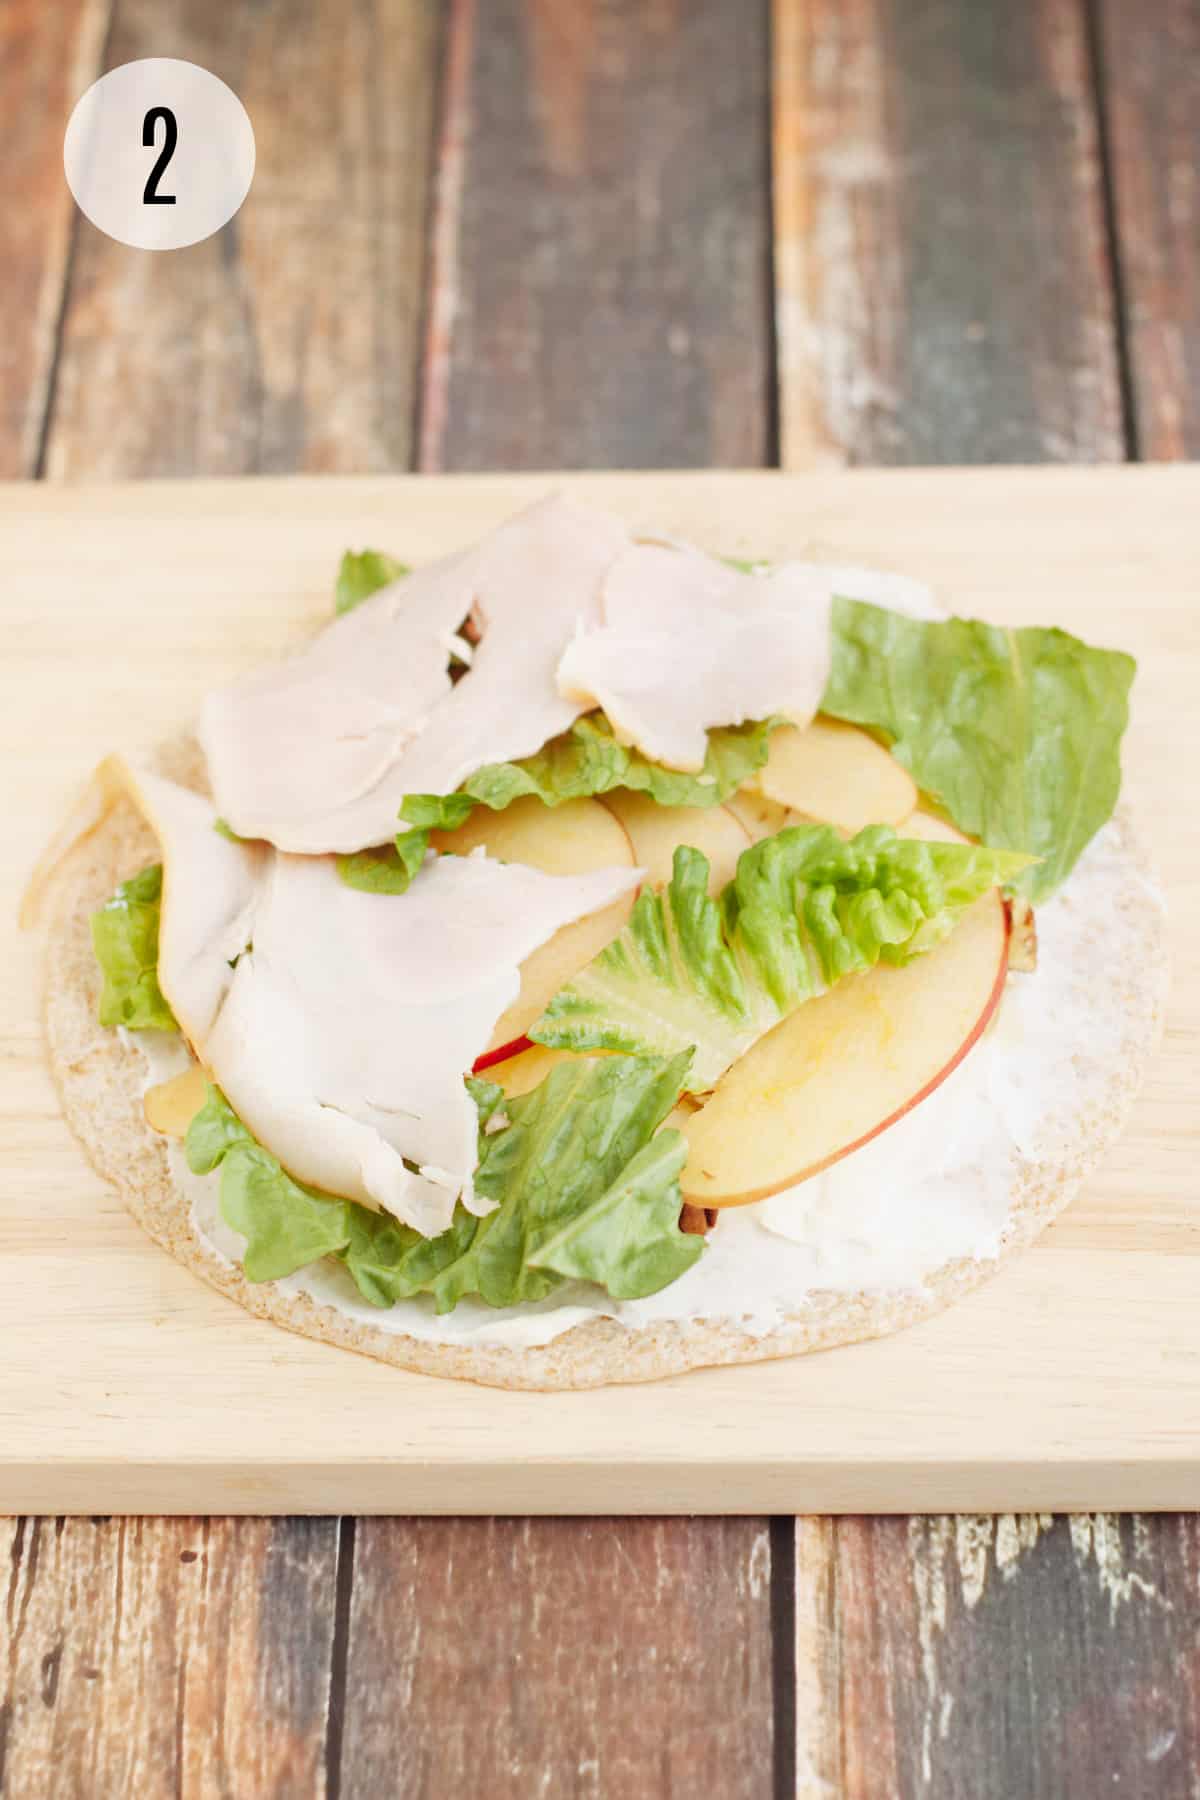 Whole wheat tortilla layered with cream cheese, sliced apples, lettuce and deli turkey on a wooden cutting board and step #2 in upper left corner. 